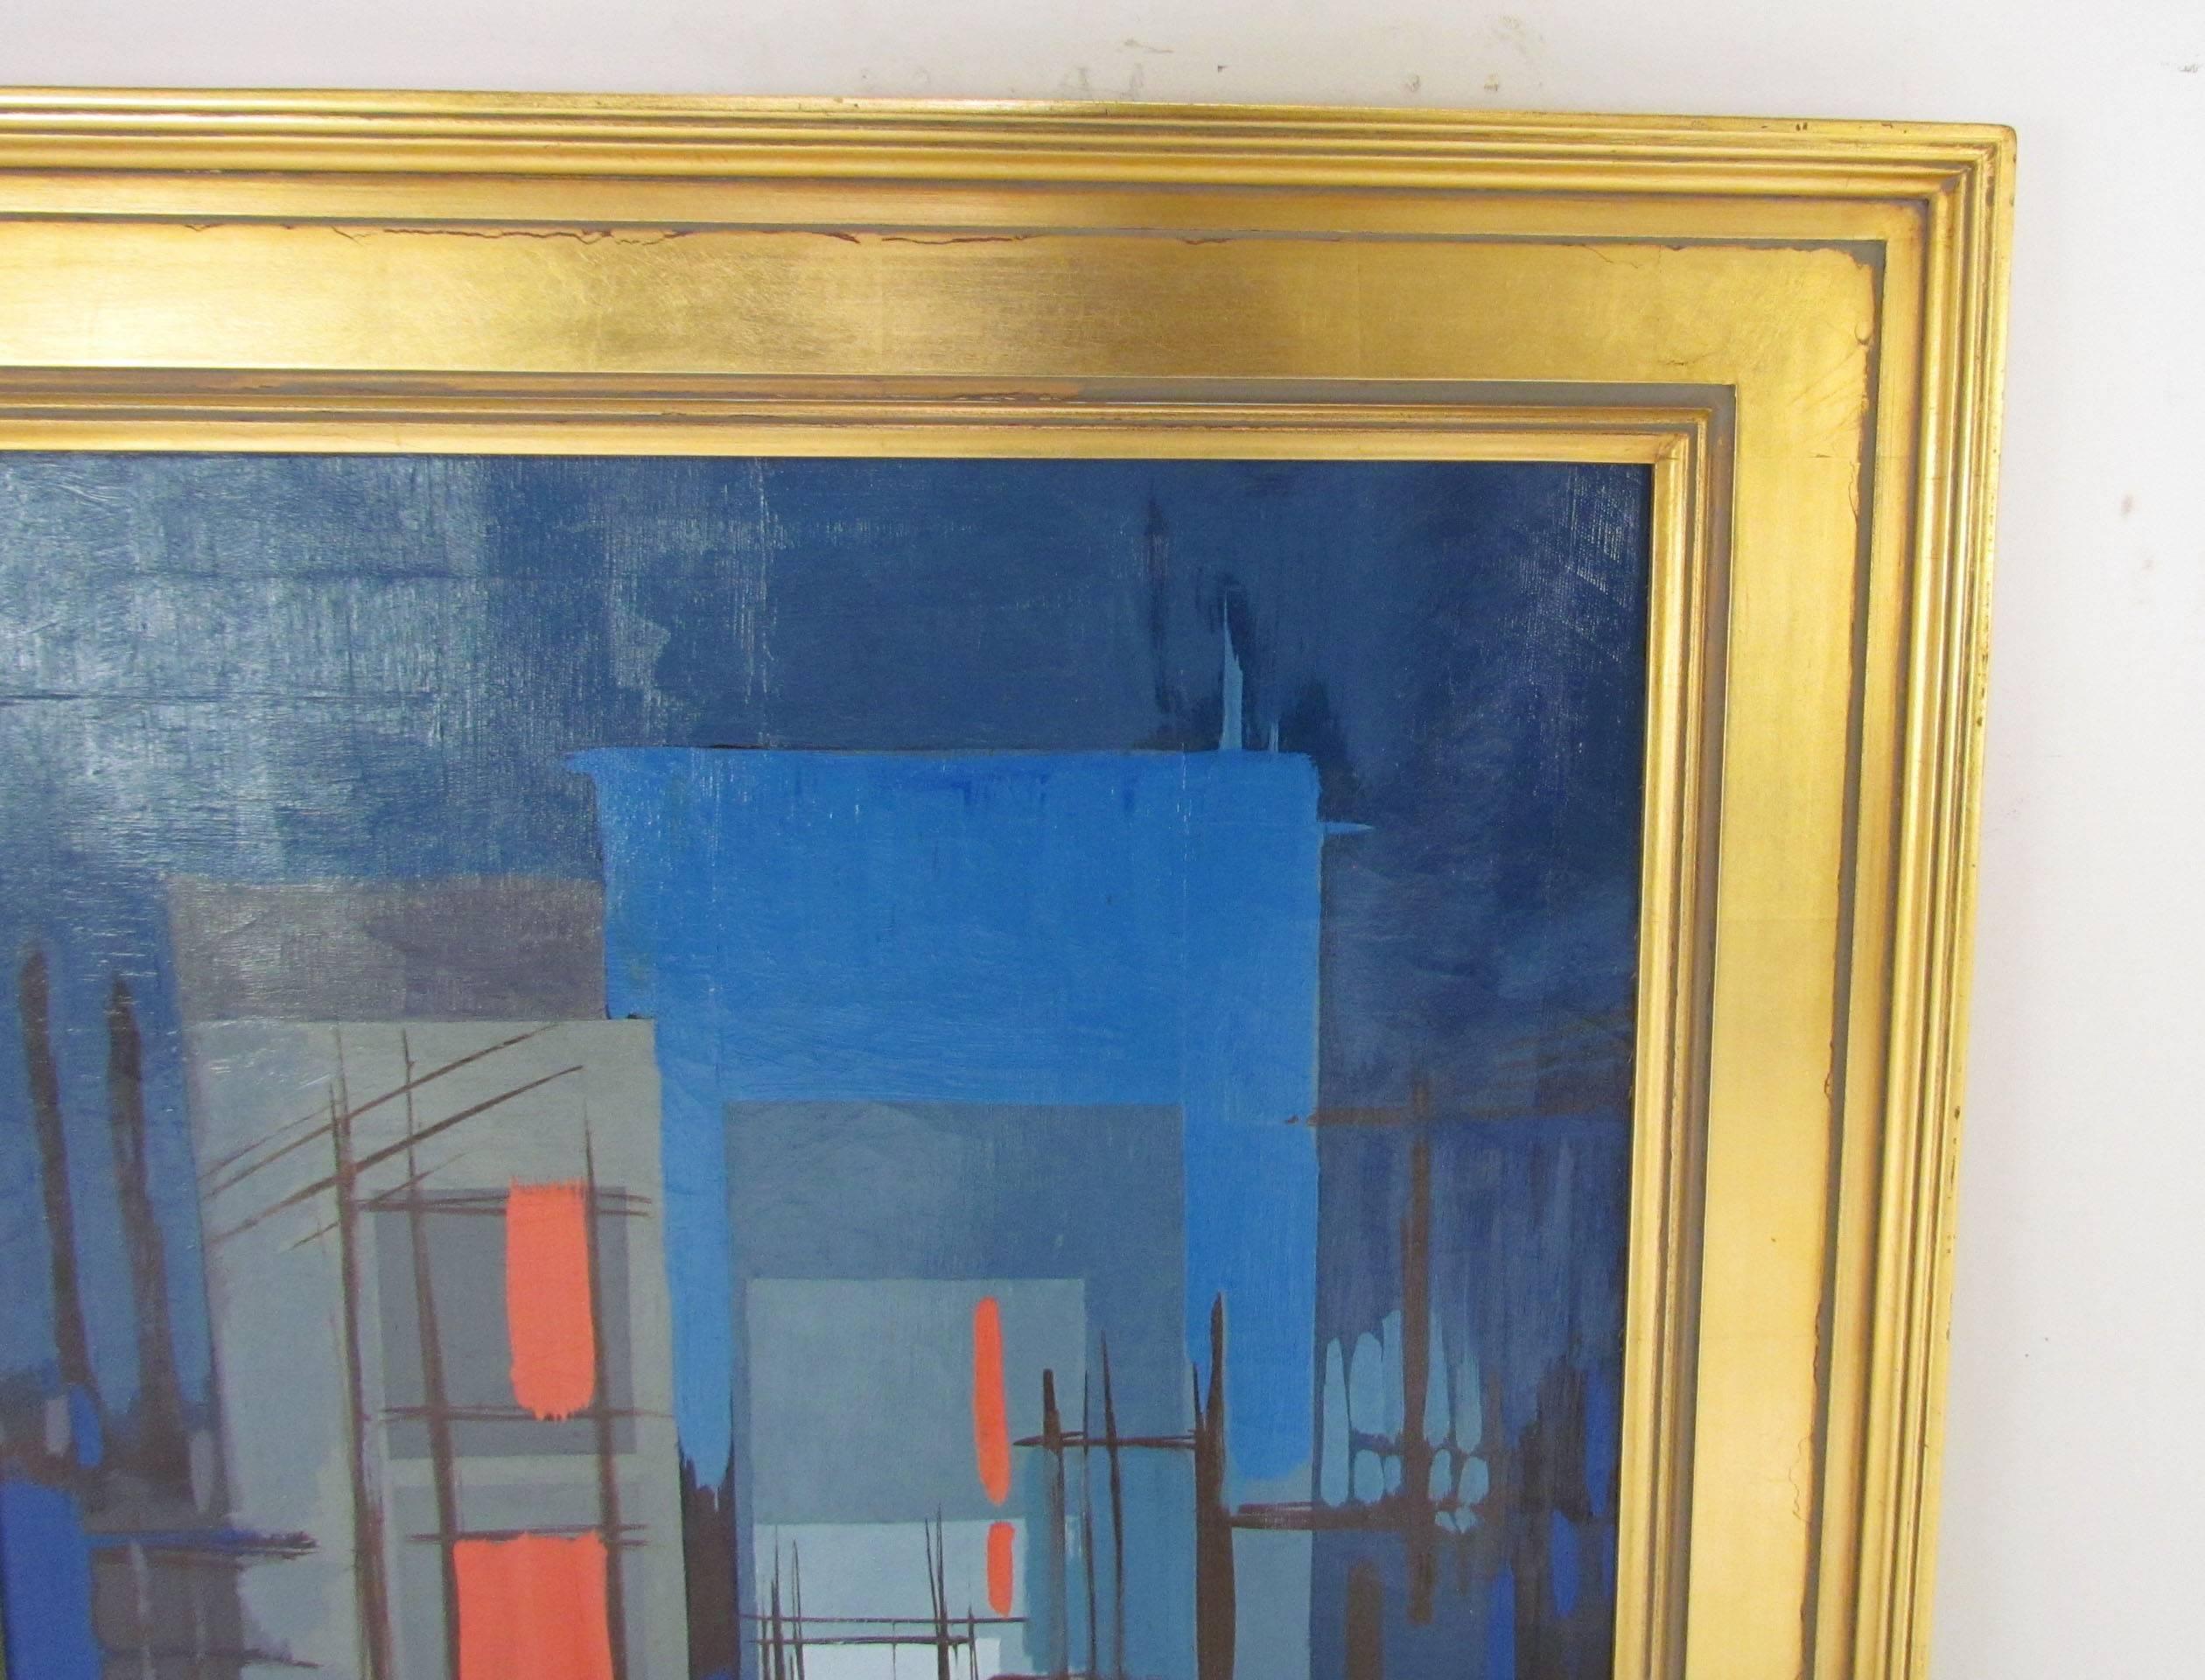 Mid-Century abstract linear oil painting by Eugene Kloszewski, dated 1956.

Kloszewski studied at Cleveland Institute of Art and Yale University under Josef Albers, who became a lifelong friend and mentor. He later taught mural painting at Yale